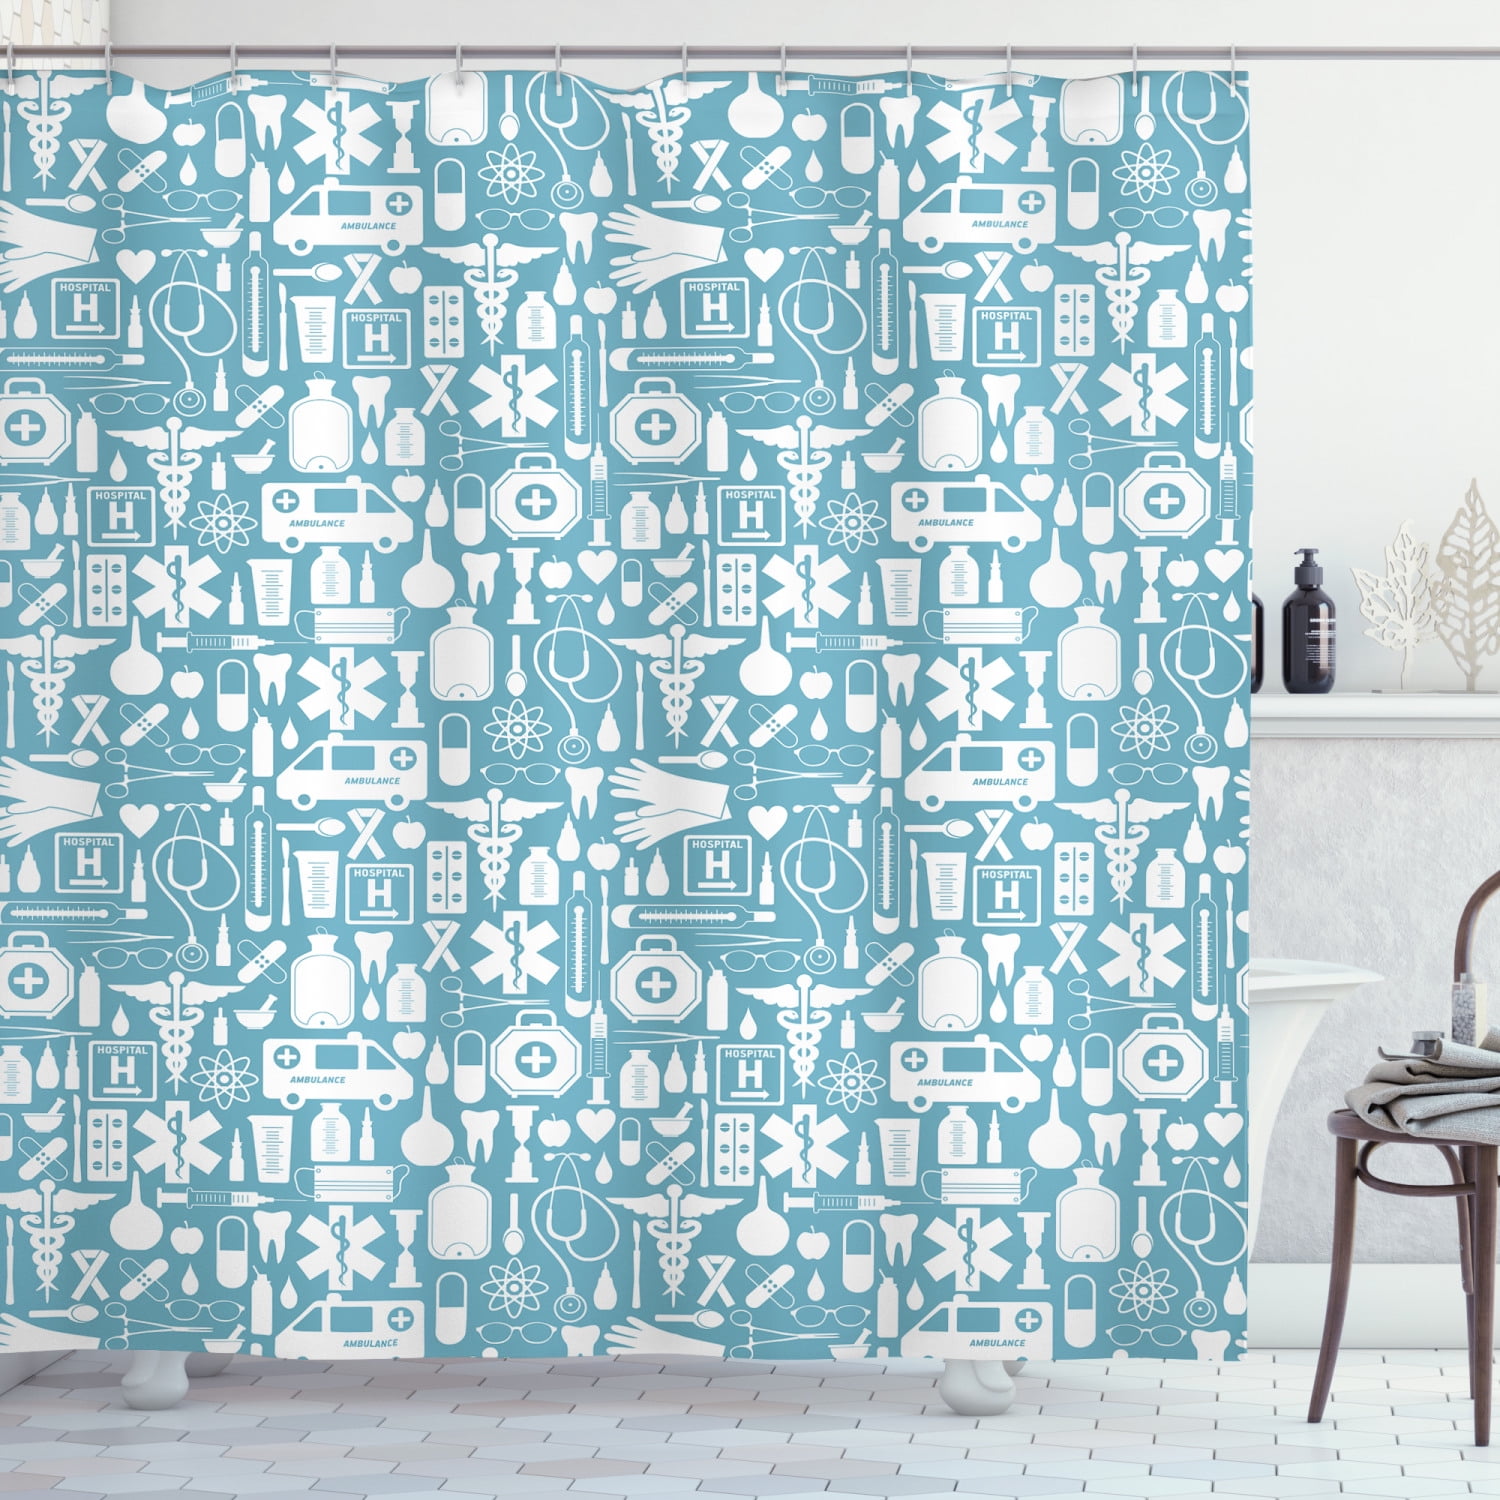 Apothecary Shower Curtain Medication, Doctor Who Bathroom Set